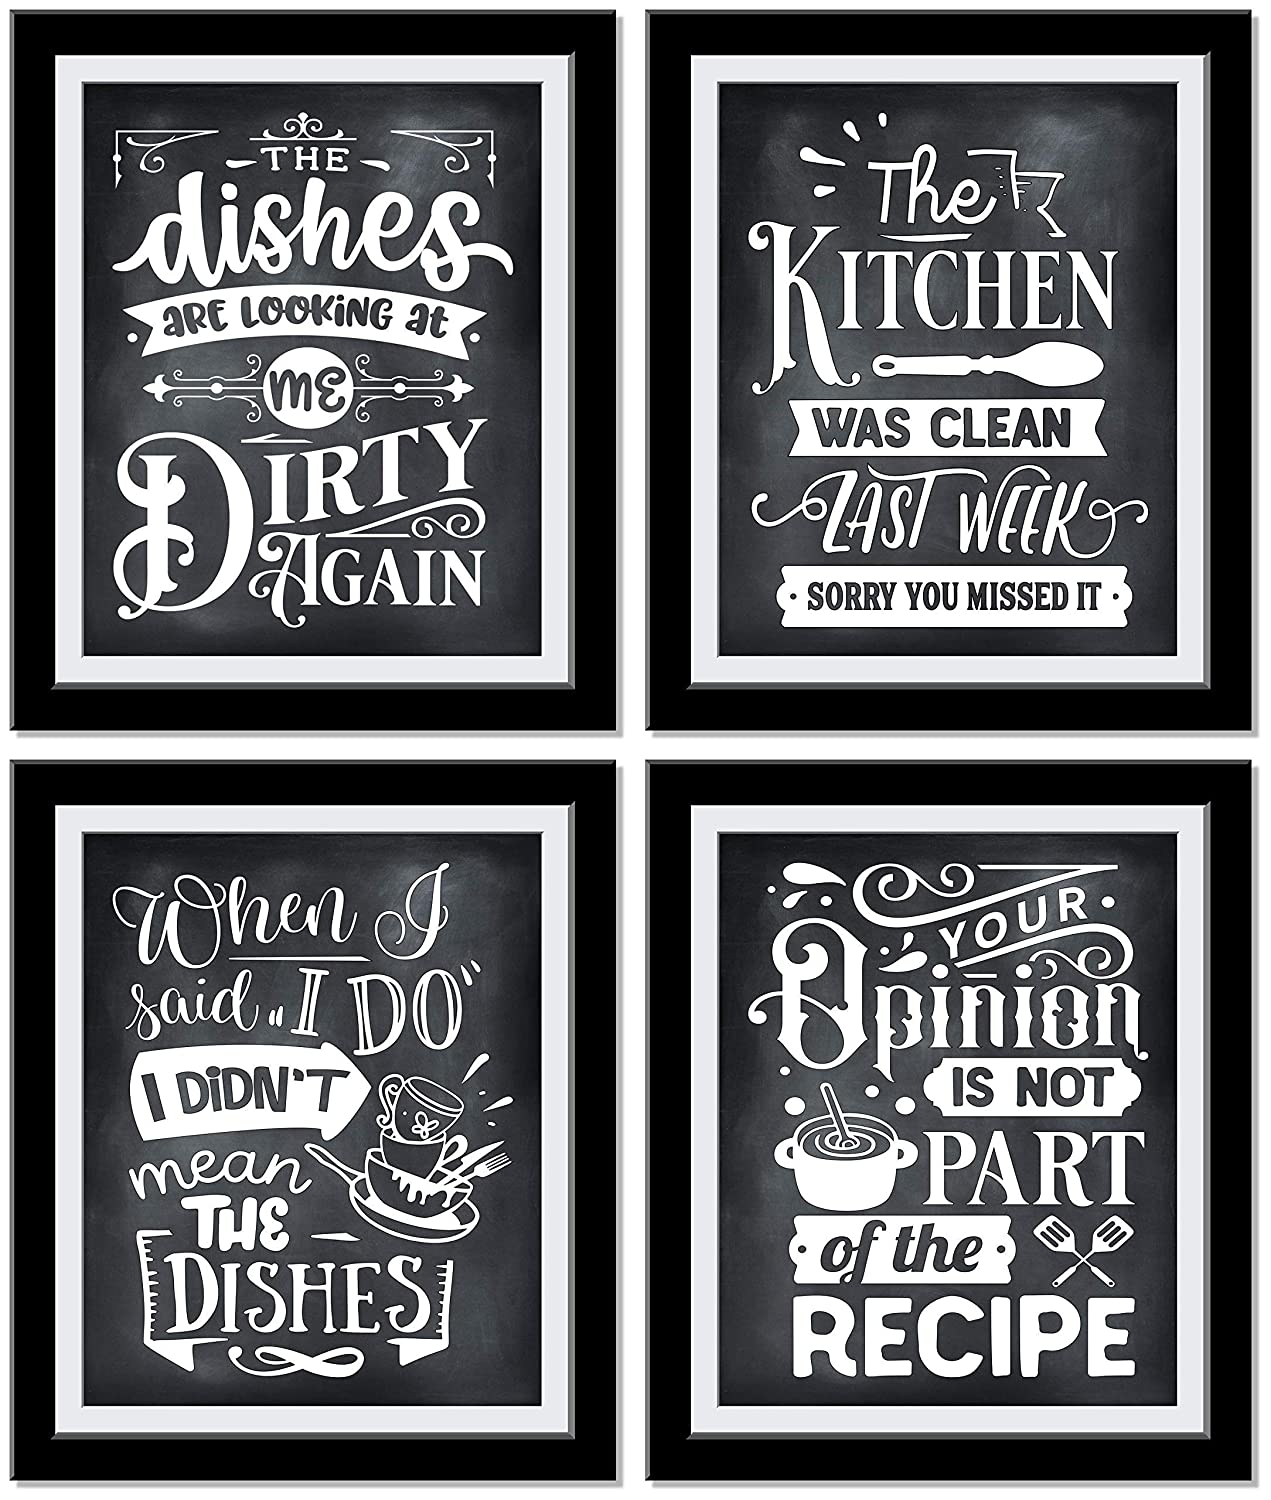 Funny Kitchen Decor, The Dishes Are Looking At Me Dirty Again, Gift For Mom